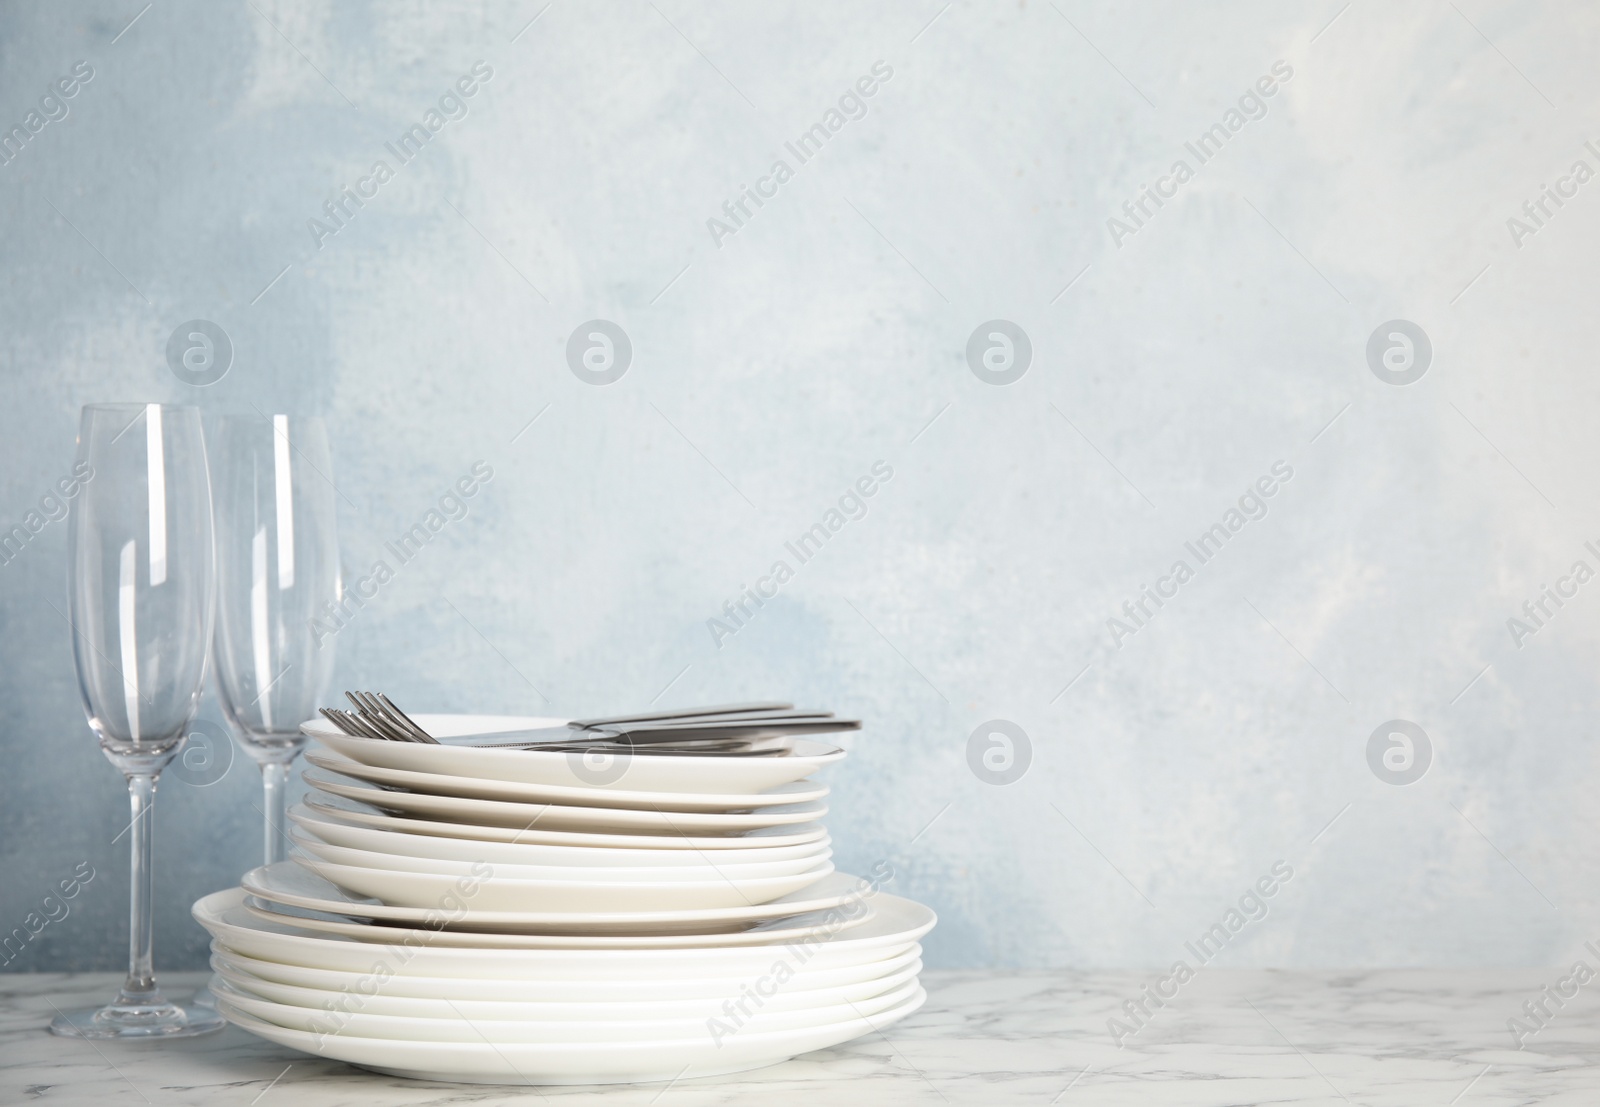 Photo of Stack of clean plates, cutlery and glasses on white marble table against light blue background. Space for text